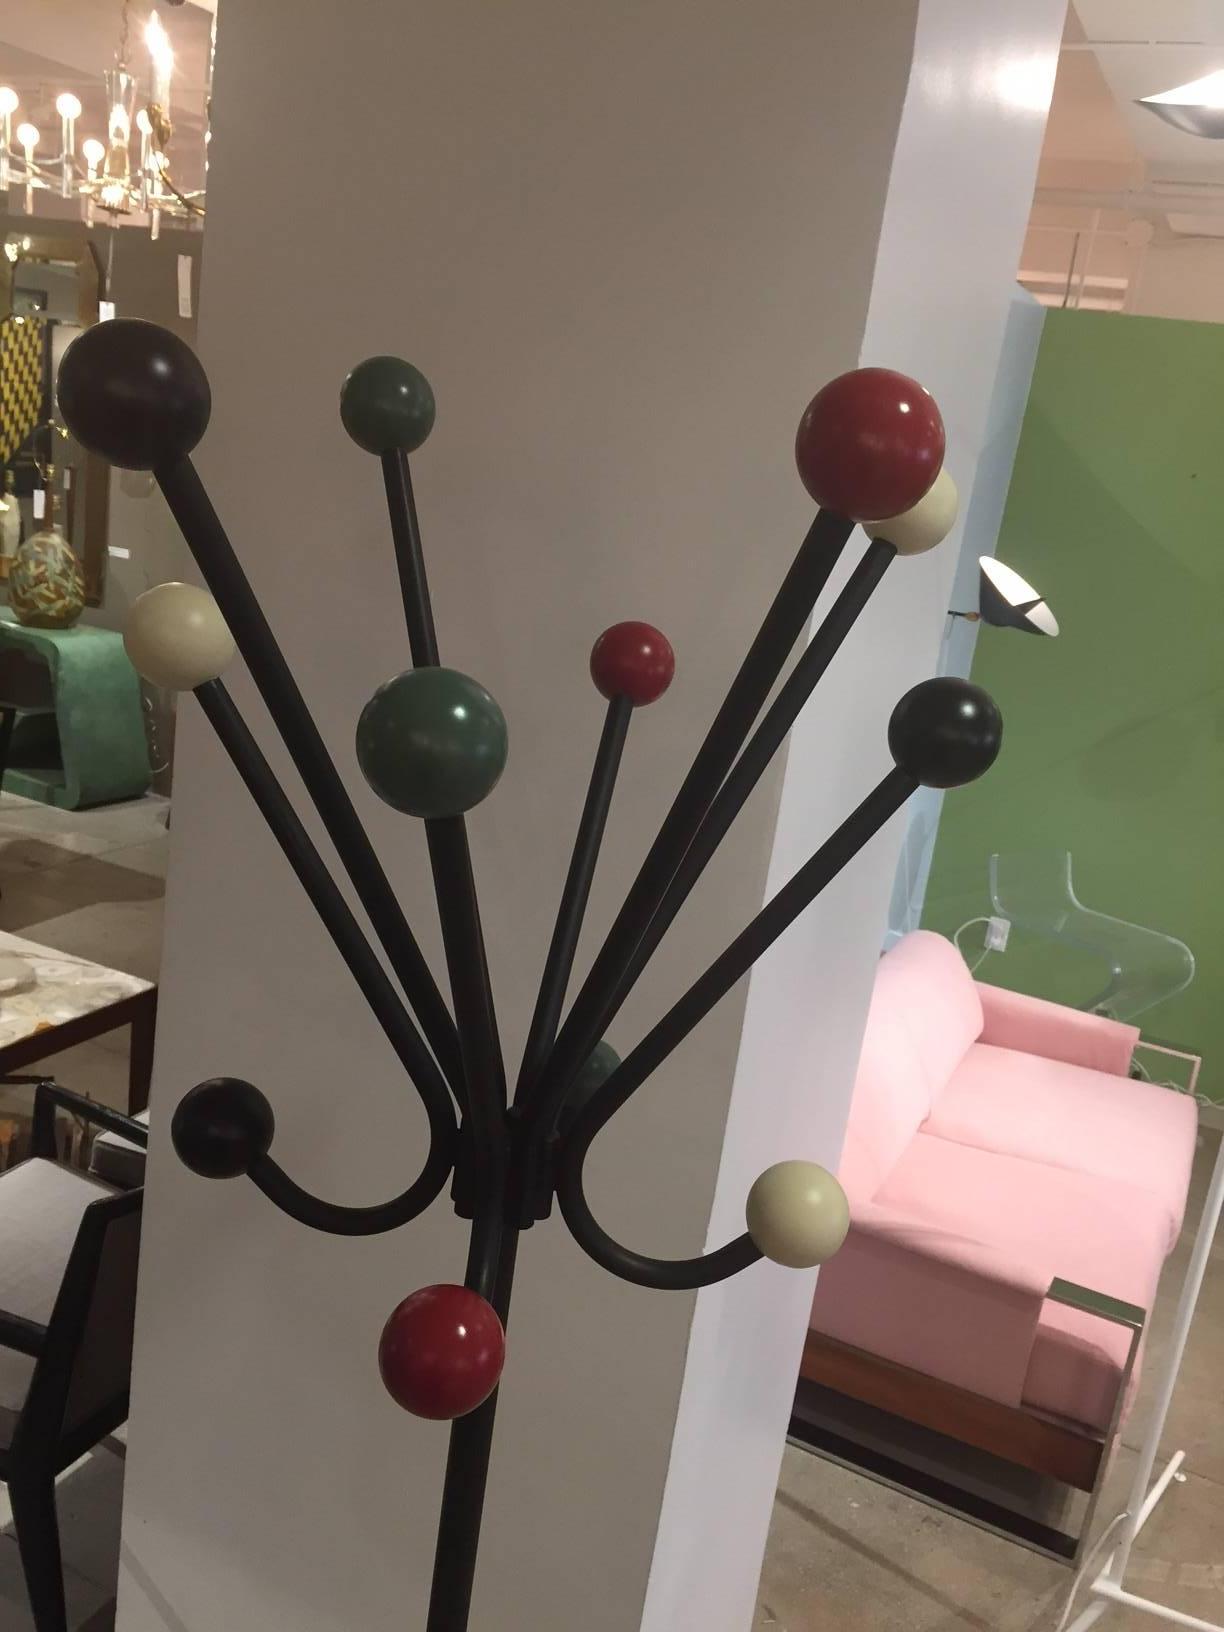 Distinctive French Design from the 1950s. Metal base and each arm capped with a wood ball. 
Four different color balls: Red, black, white and green.